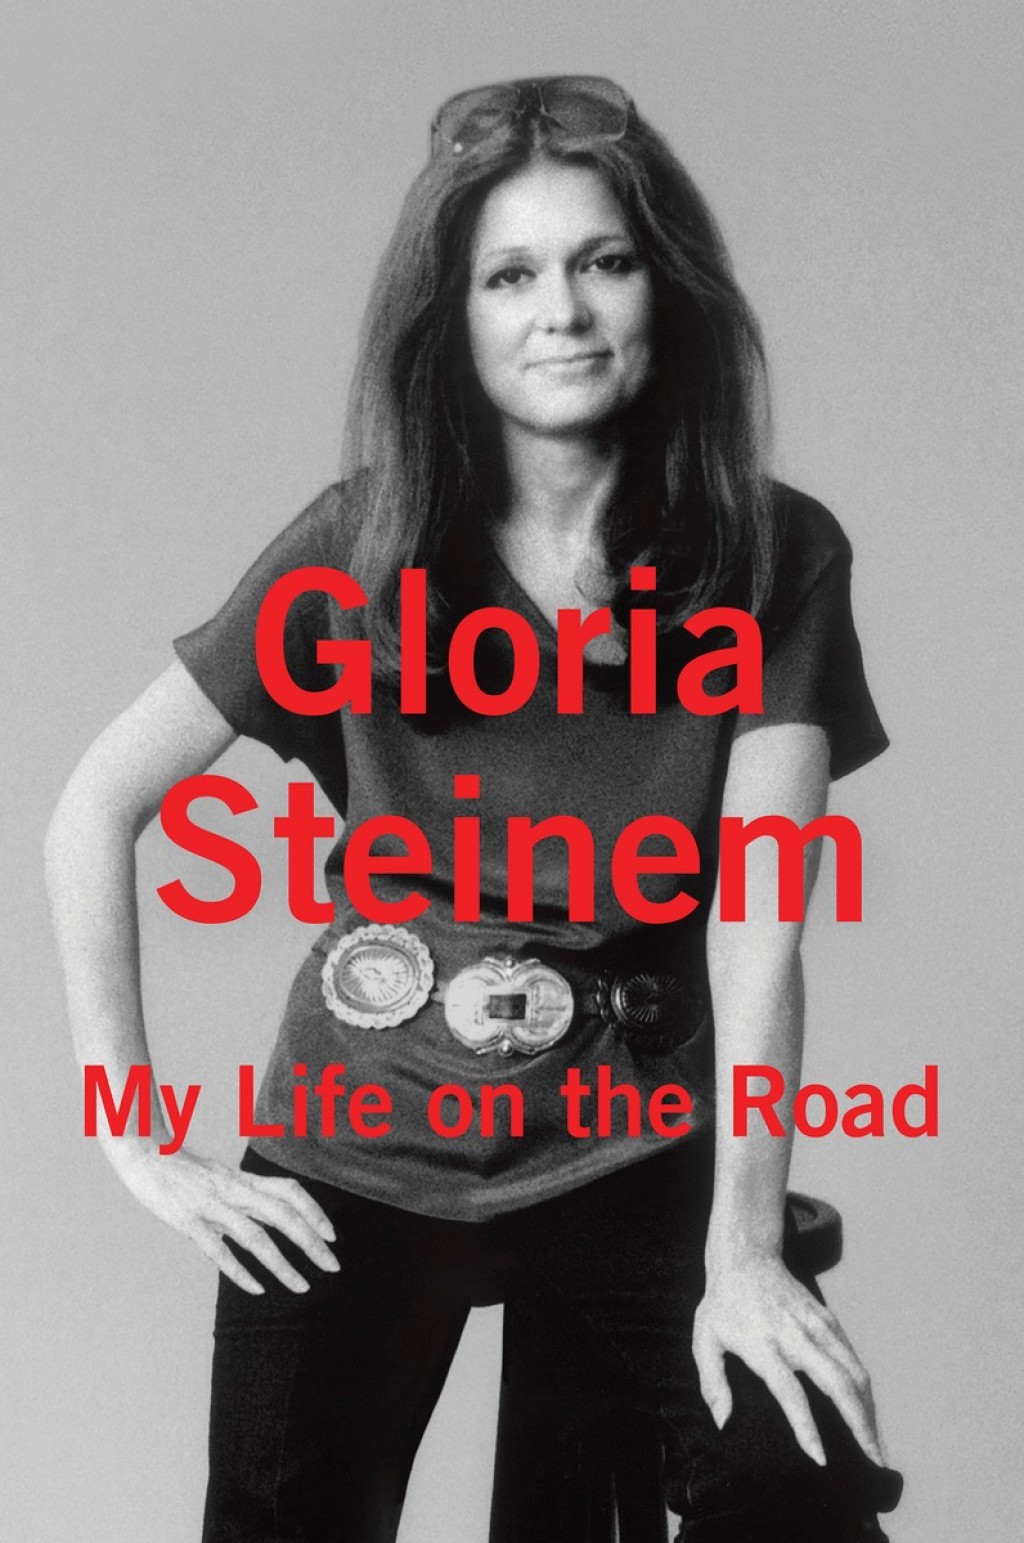 Cover image for Gloria Steinem's 'My Life on the Road'